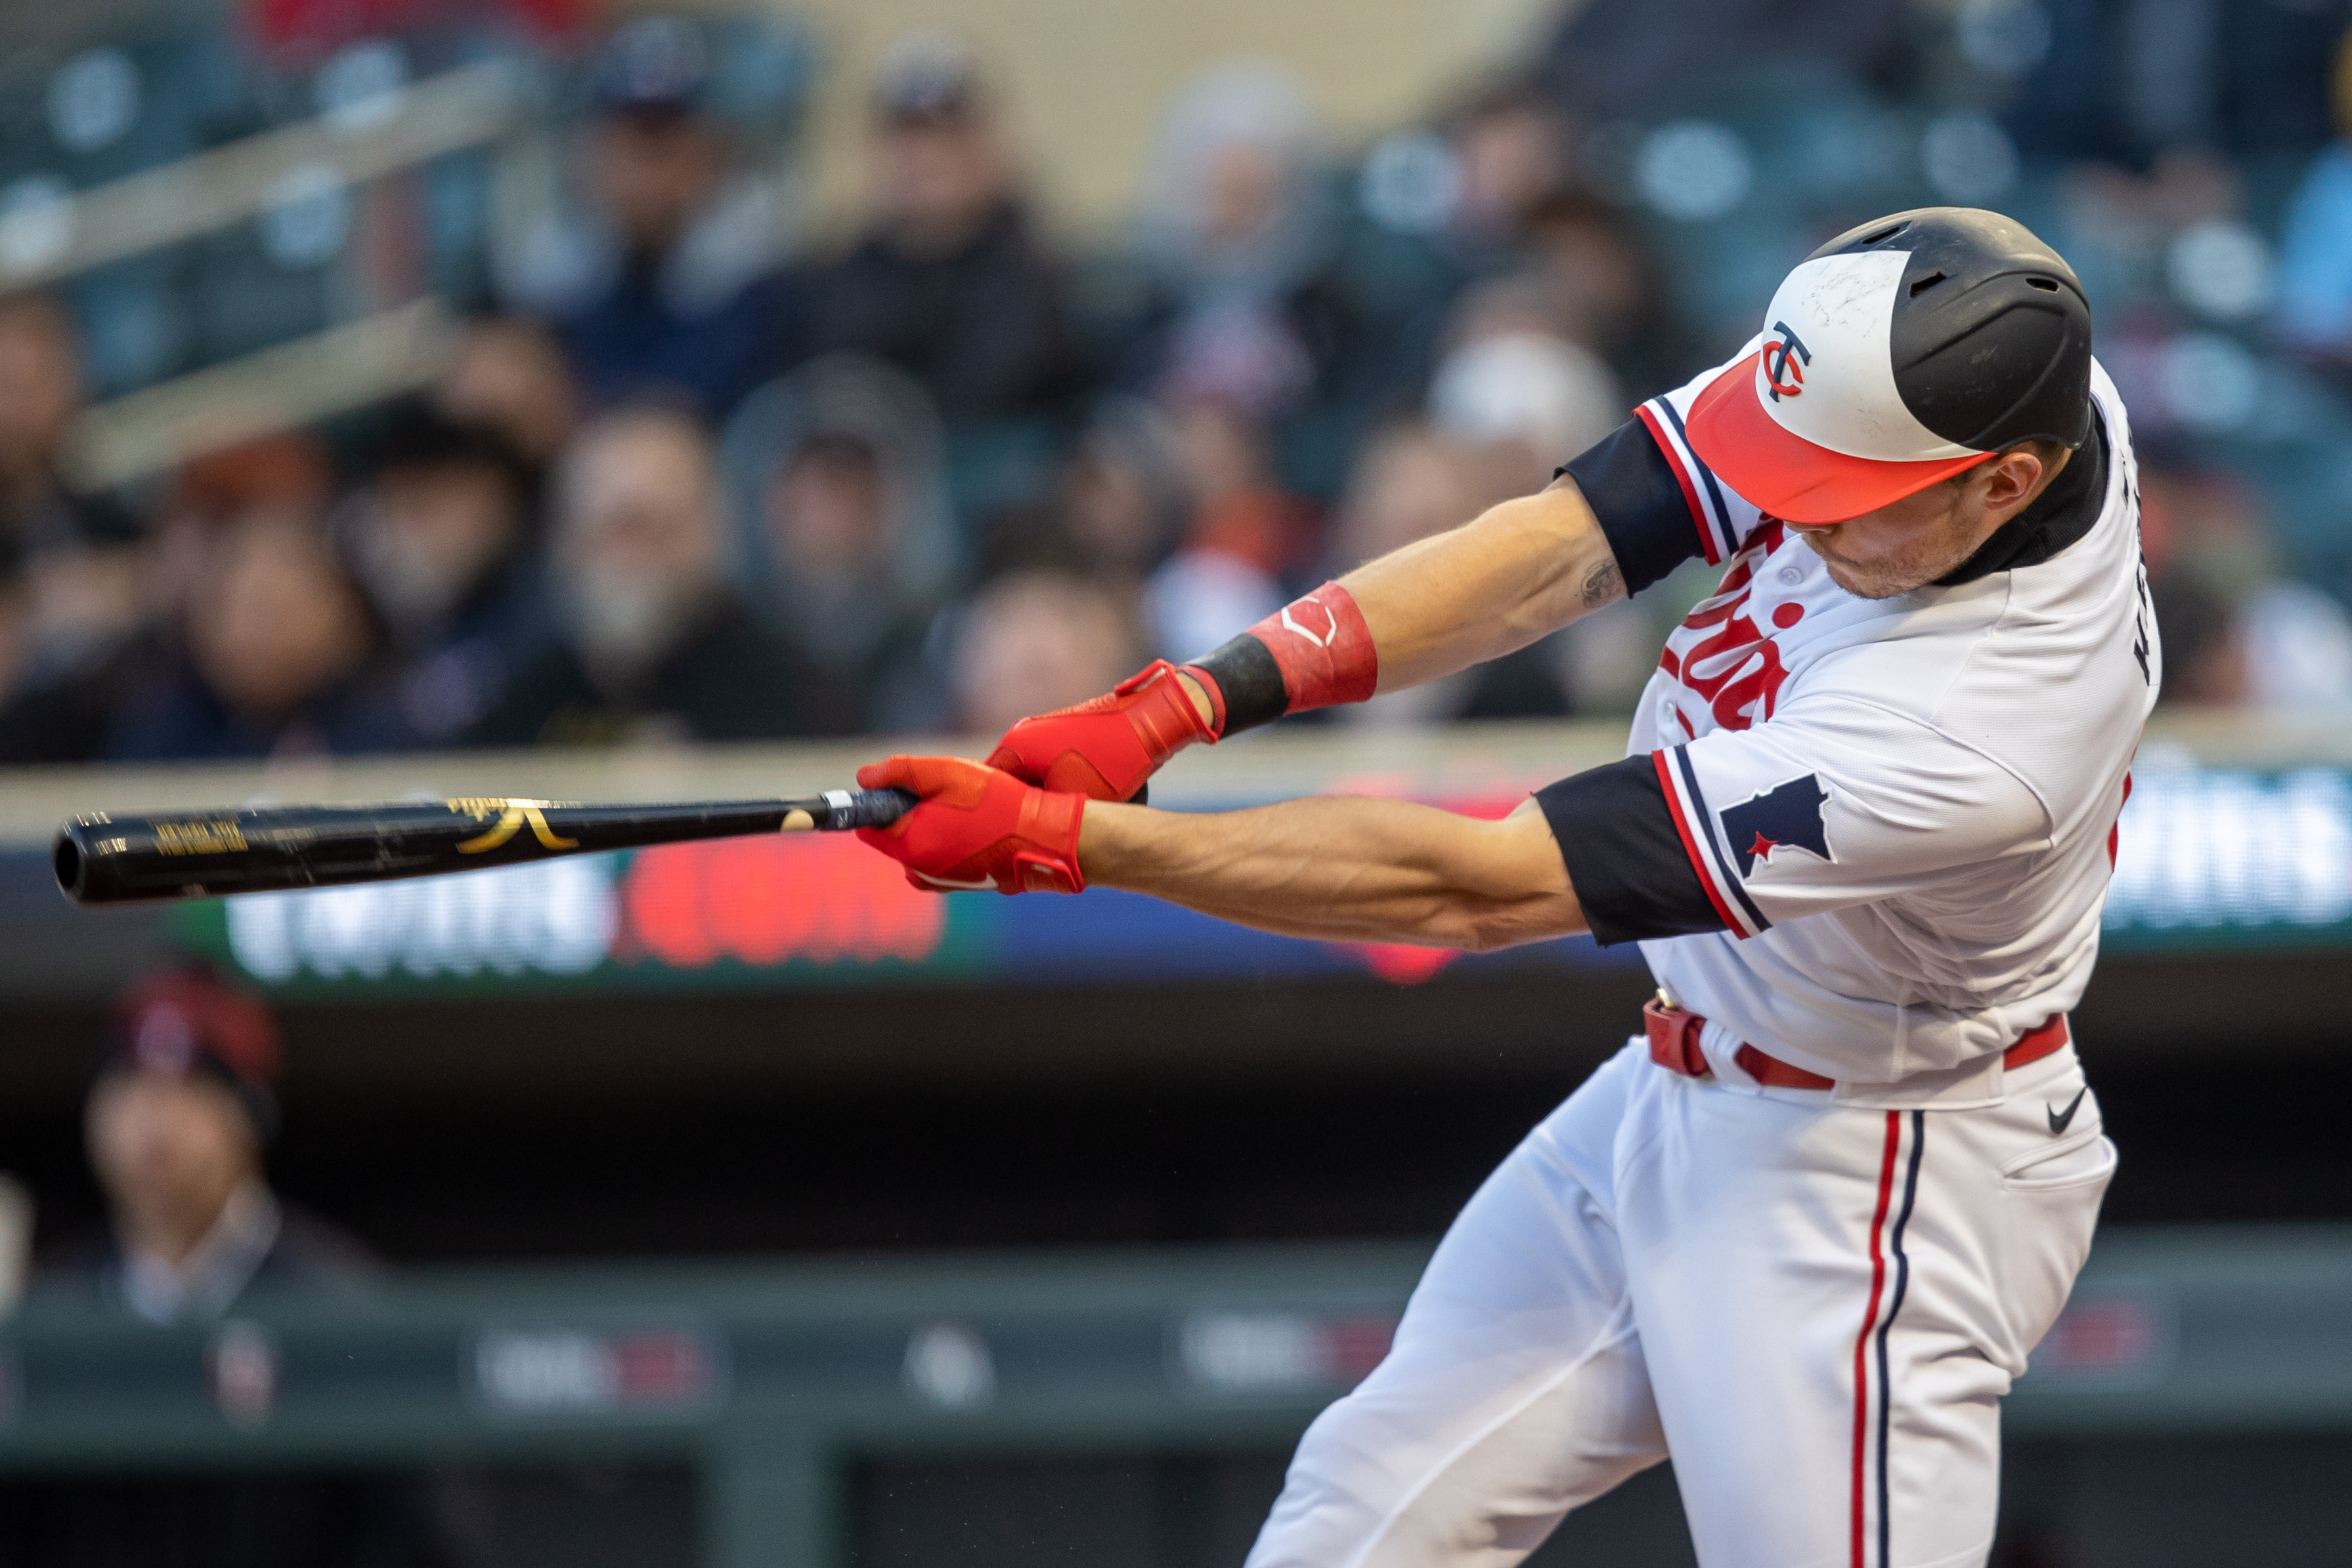 Twins put away Yankees 6-1 behind Sonny Gray's dominance, Joey Gallo's  booming home run